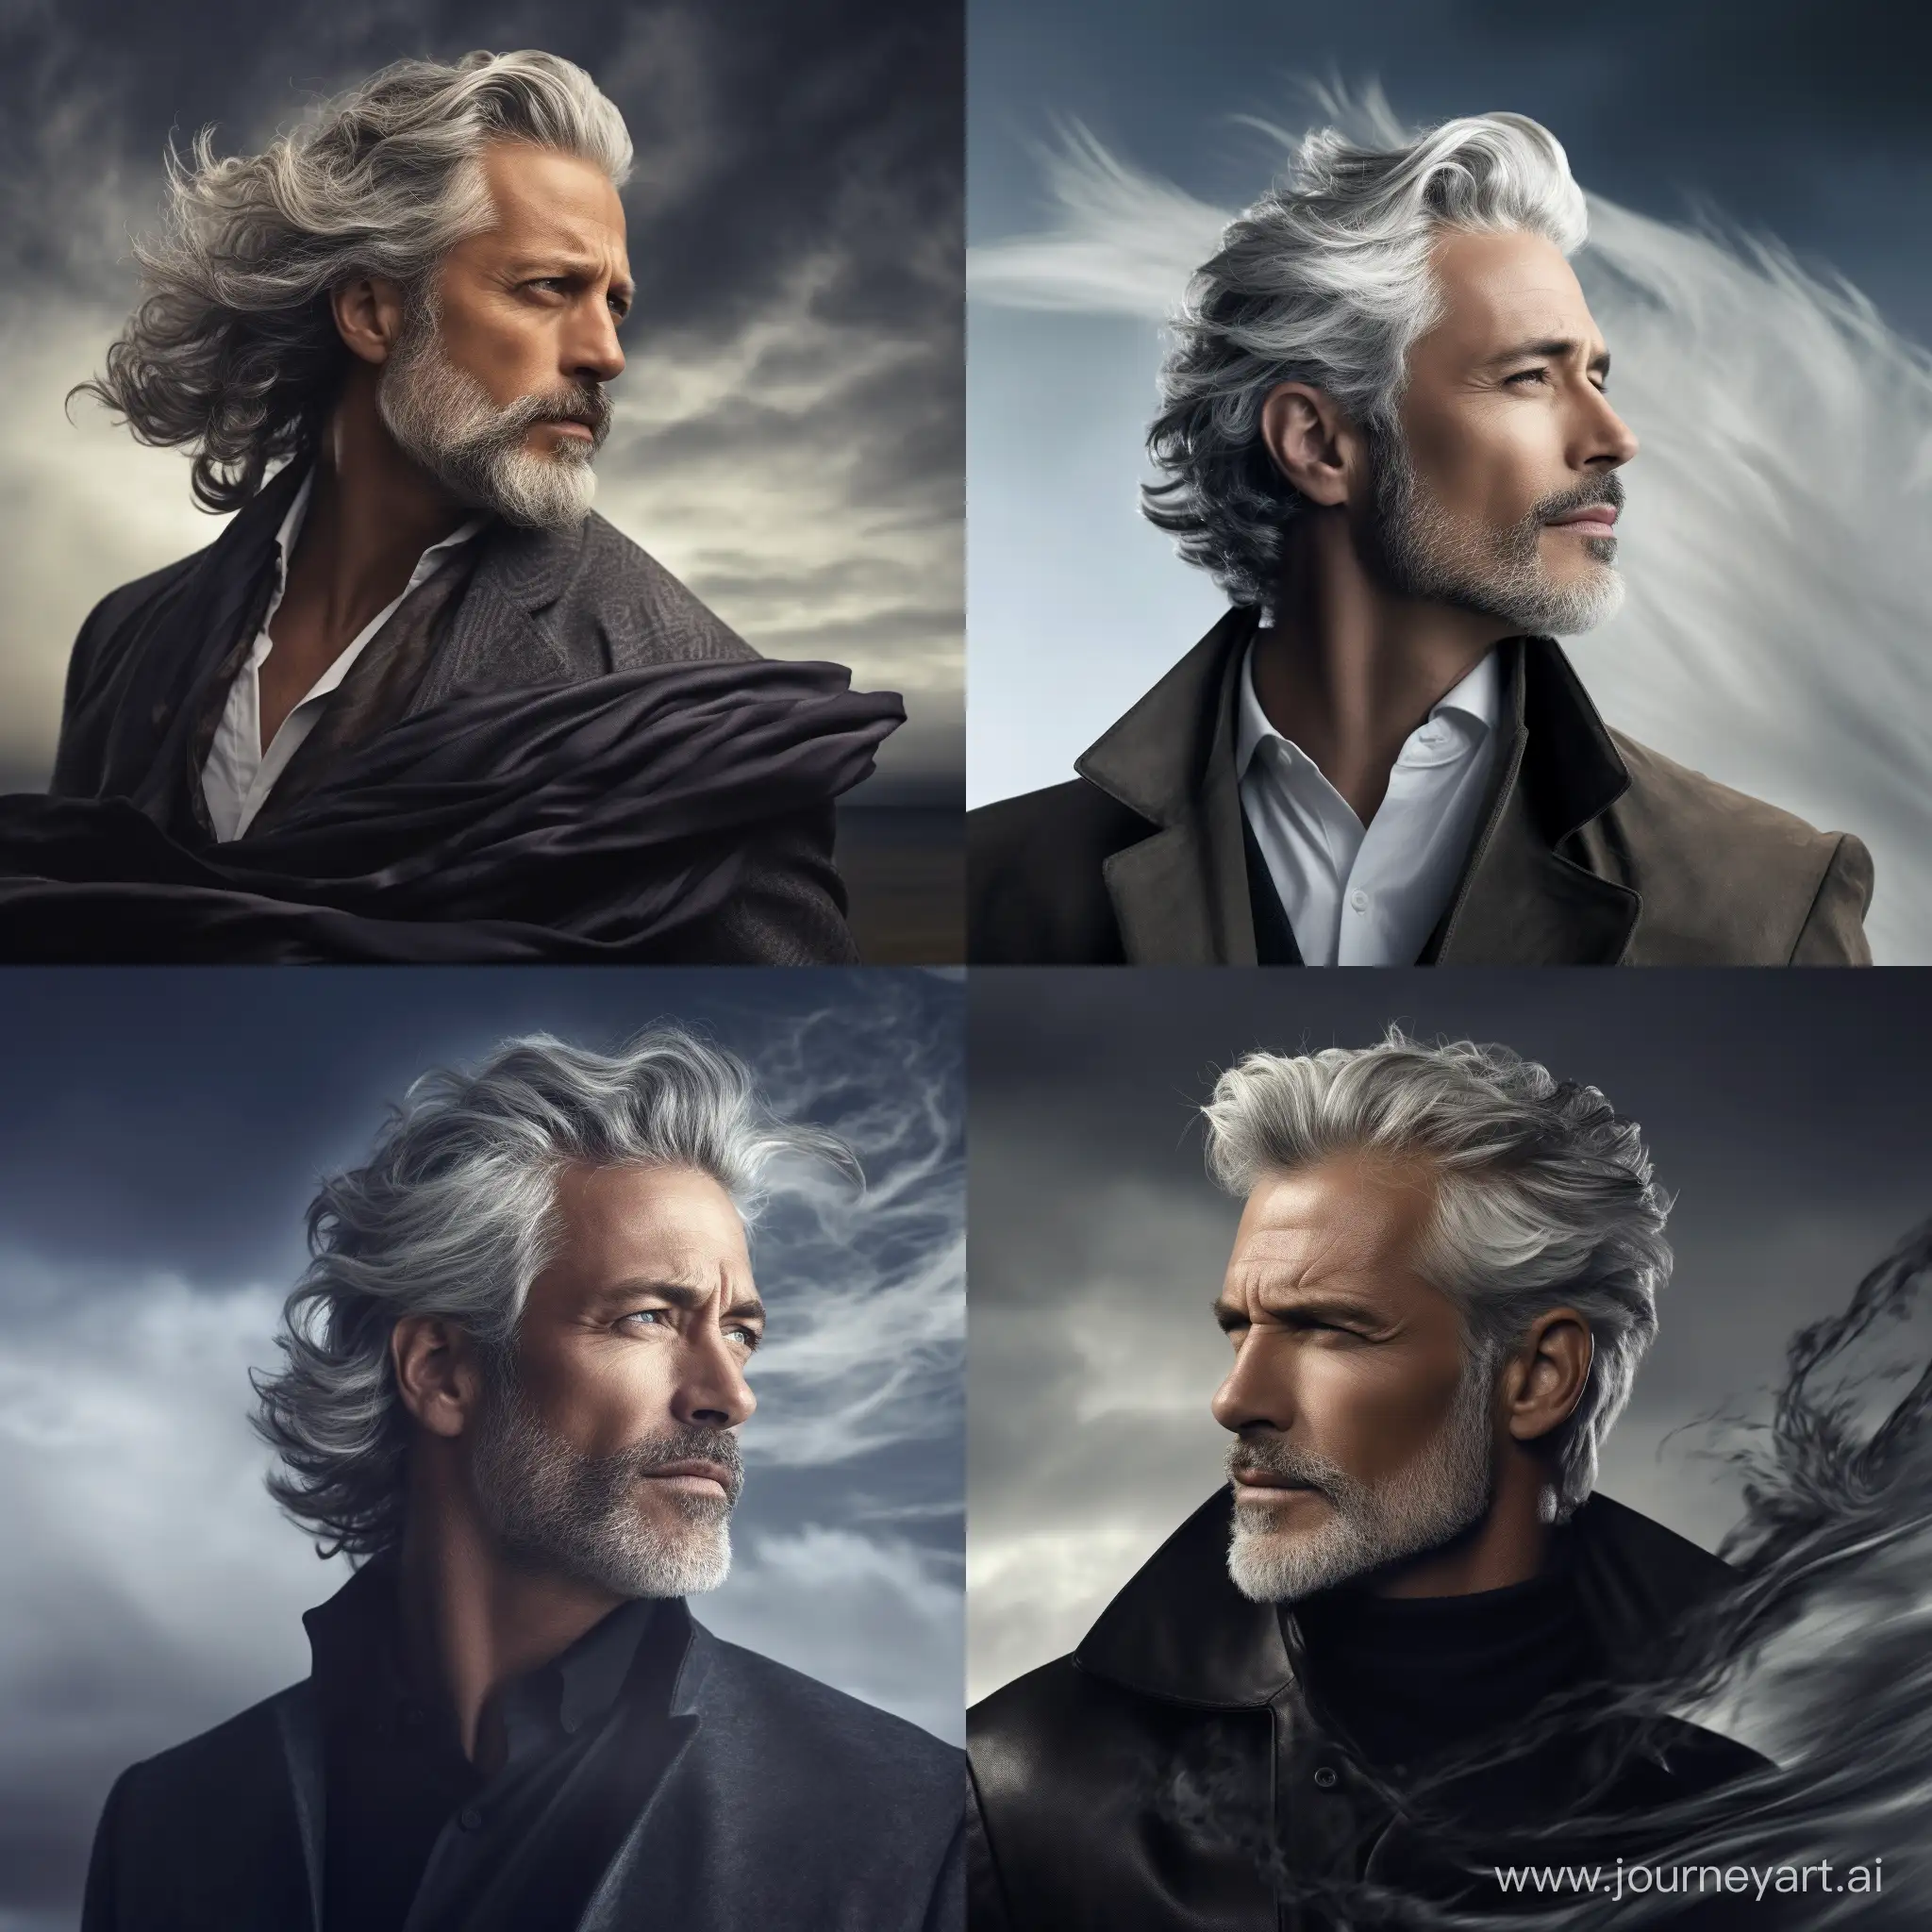 Majestic-GrayHaired-Man-Embracing-the-Wind-in-Elegant-Serenity